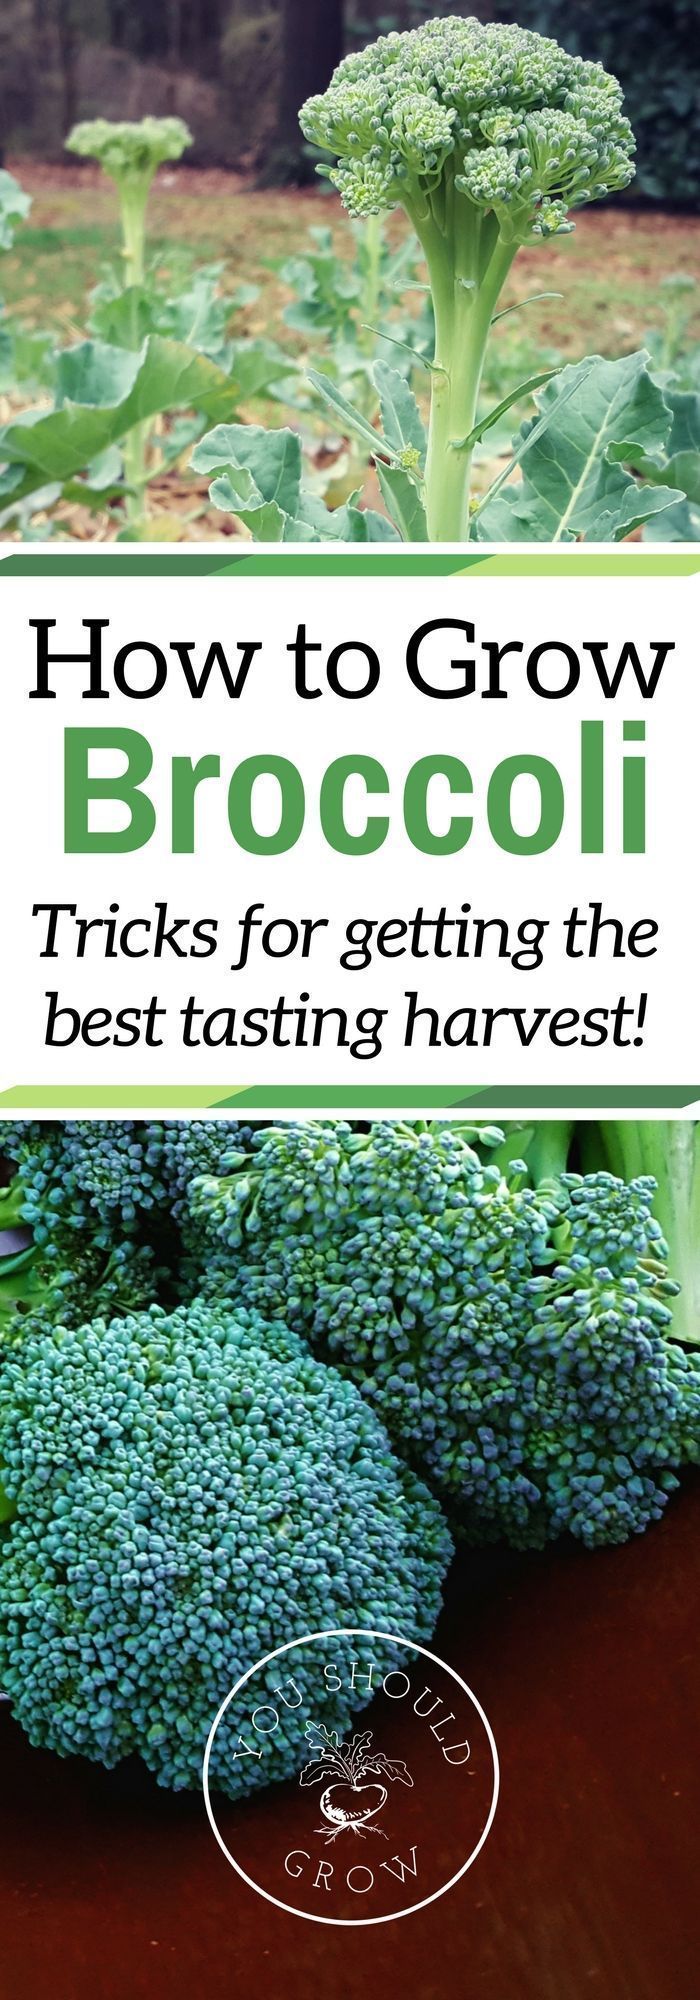 If you've had trouble growing broccoli before, read these tips for getting a...